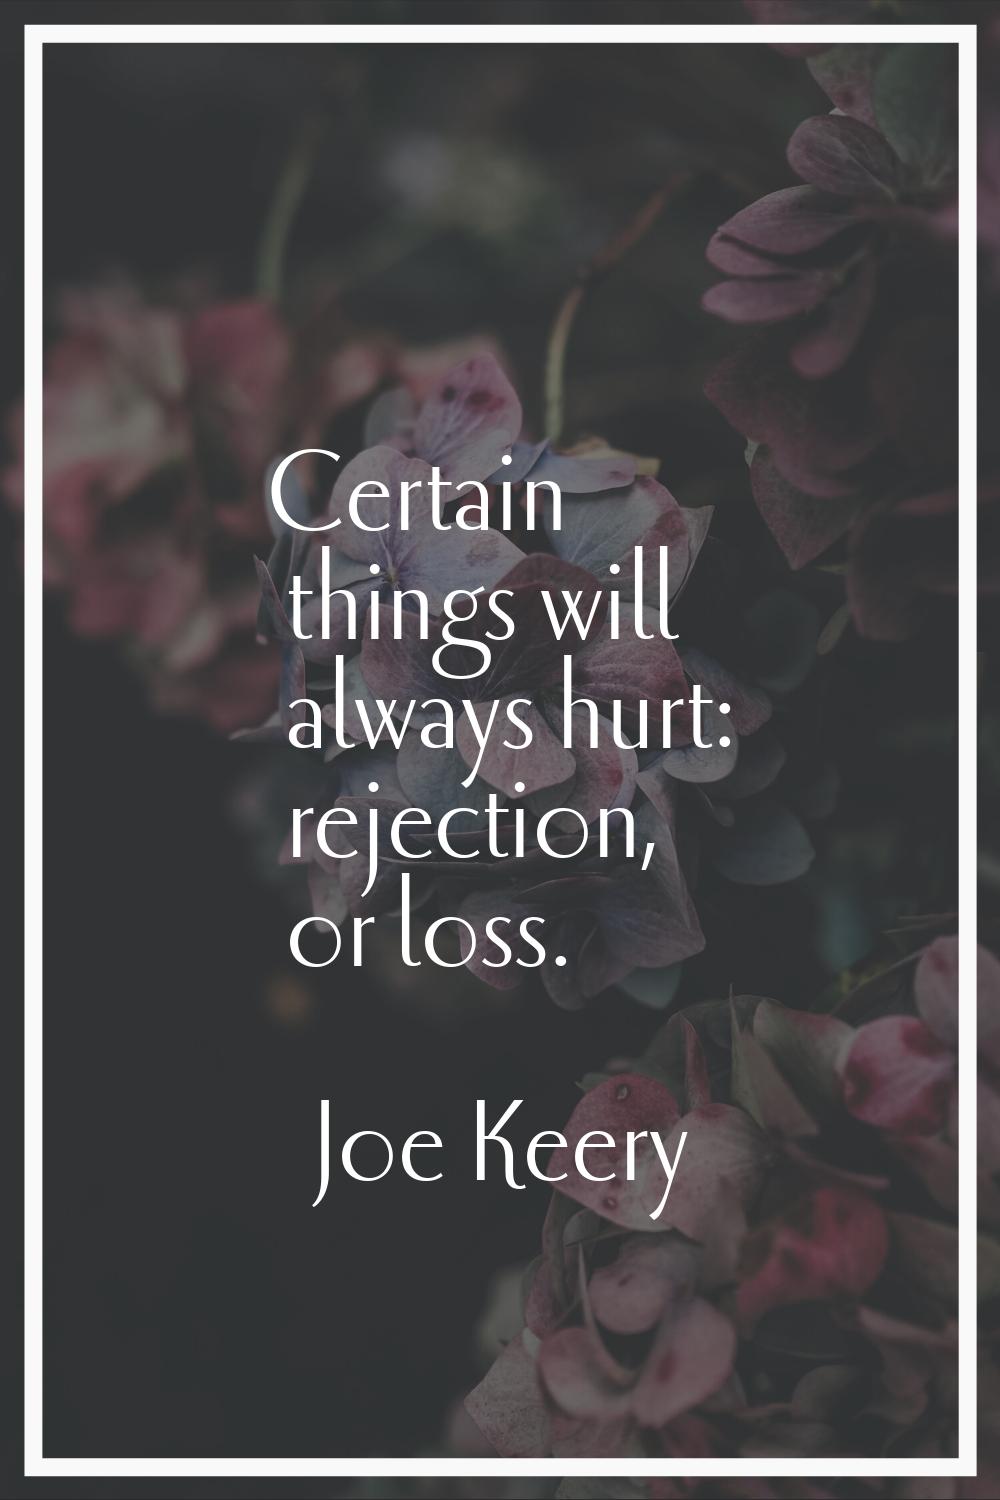 Certain things will always hurt: rejection, or loss.